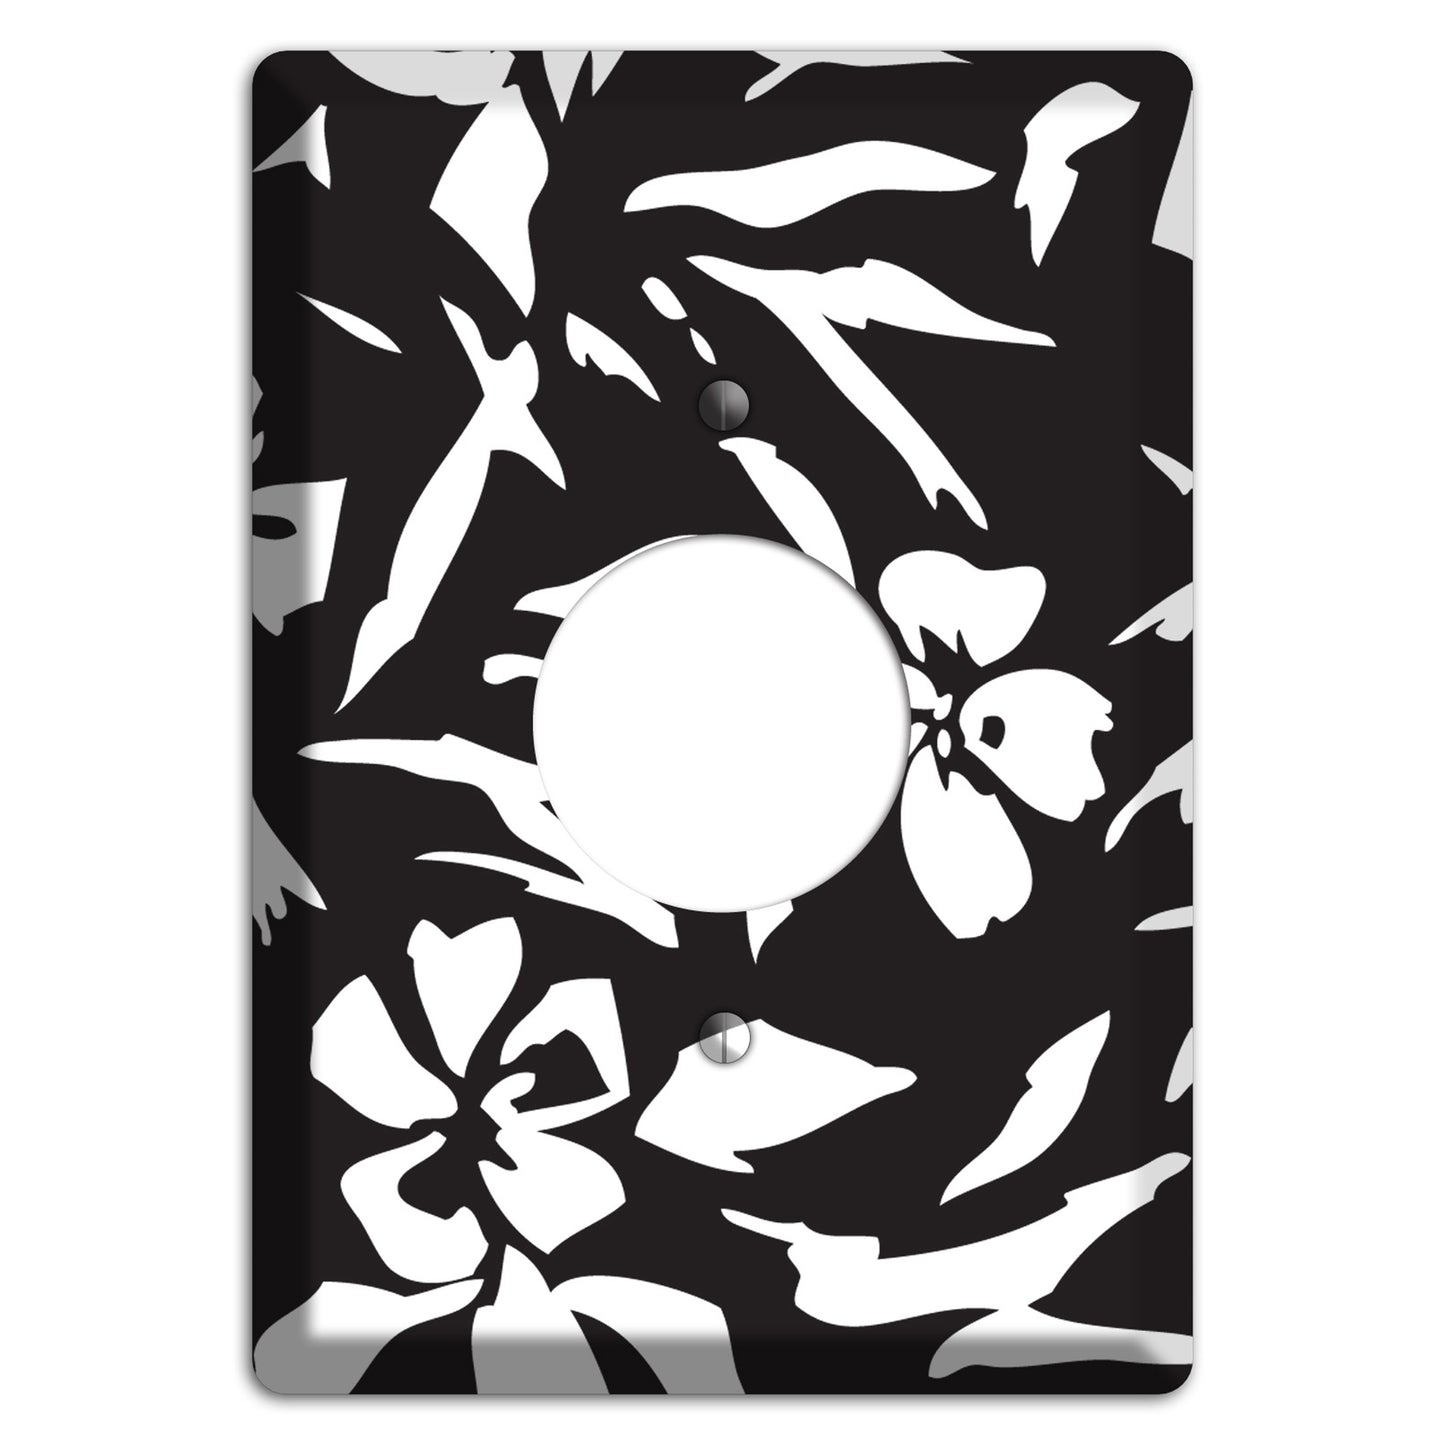 Black with White Woodcut Floral Single Receptacle Wallplate